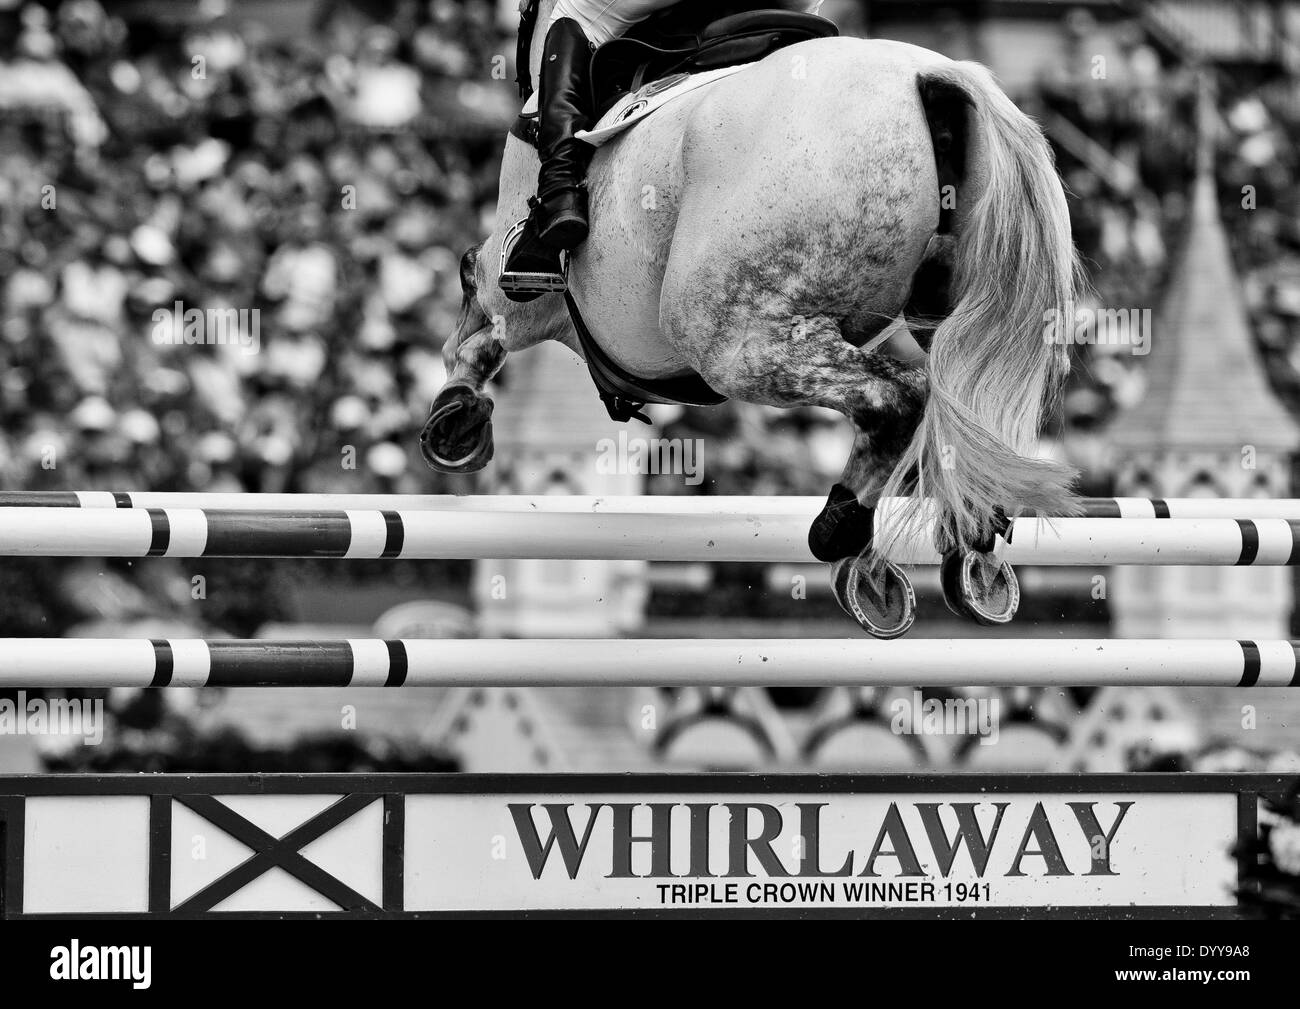 Lexington, MD, USA. 27th Apr, 2014. April 27, 2014: AVEBURY, ridden by Andrew Nicholson (NZL), competes in the Stadium Jumping Finals at the Rolex Kentucky 3-Day Event at the Kentucky Horse Park in Lexington, KY. Scott Serio/ESW/CSM/Alamy Live News Stock Photo